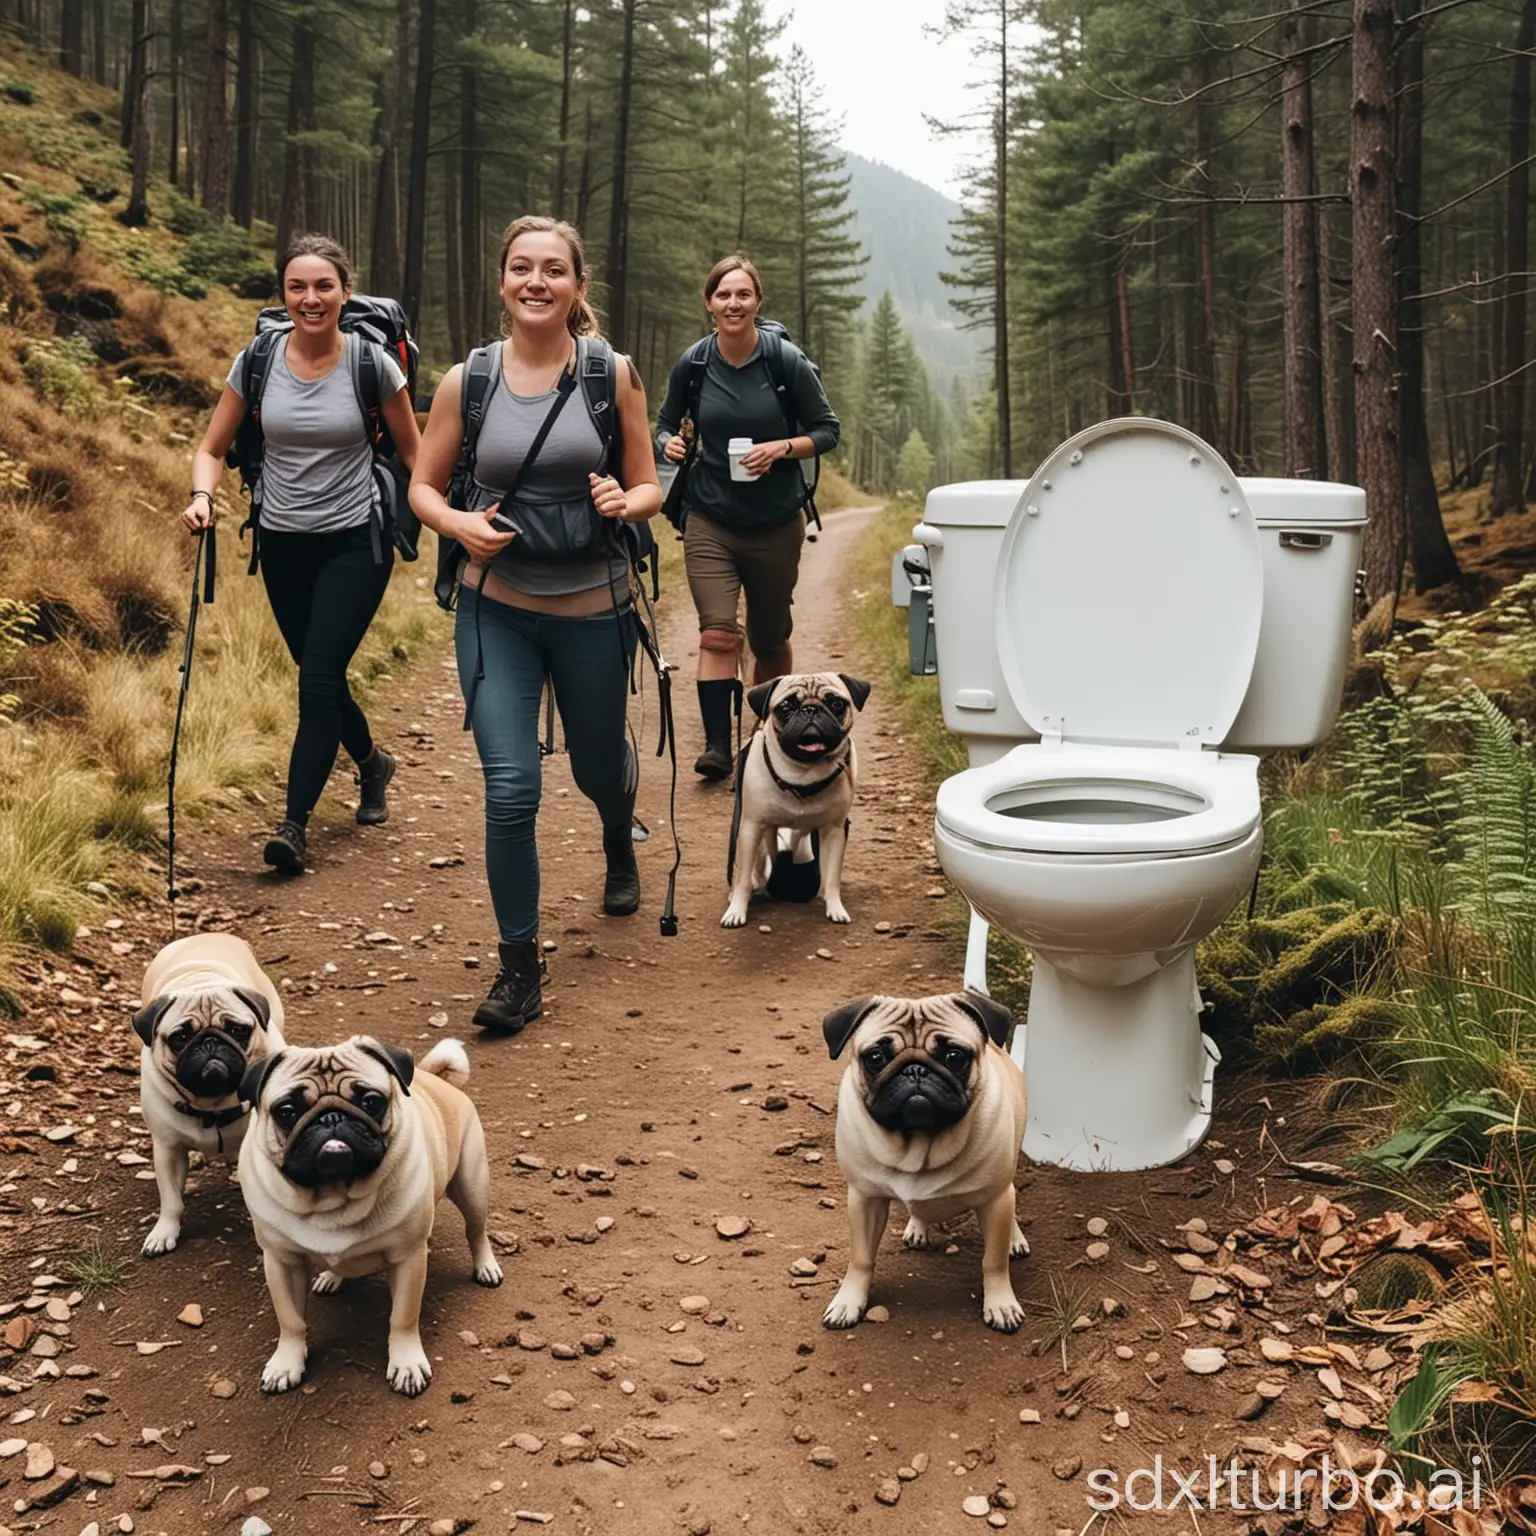 Outdoor-Adventure-Group-Hiking-with-Pug-and-Toilet